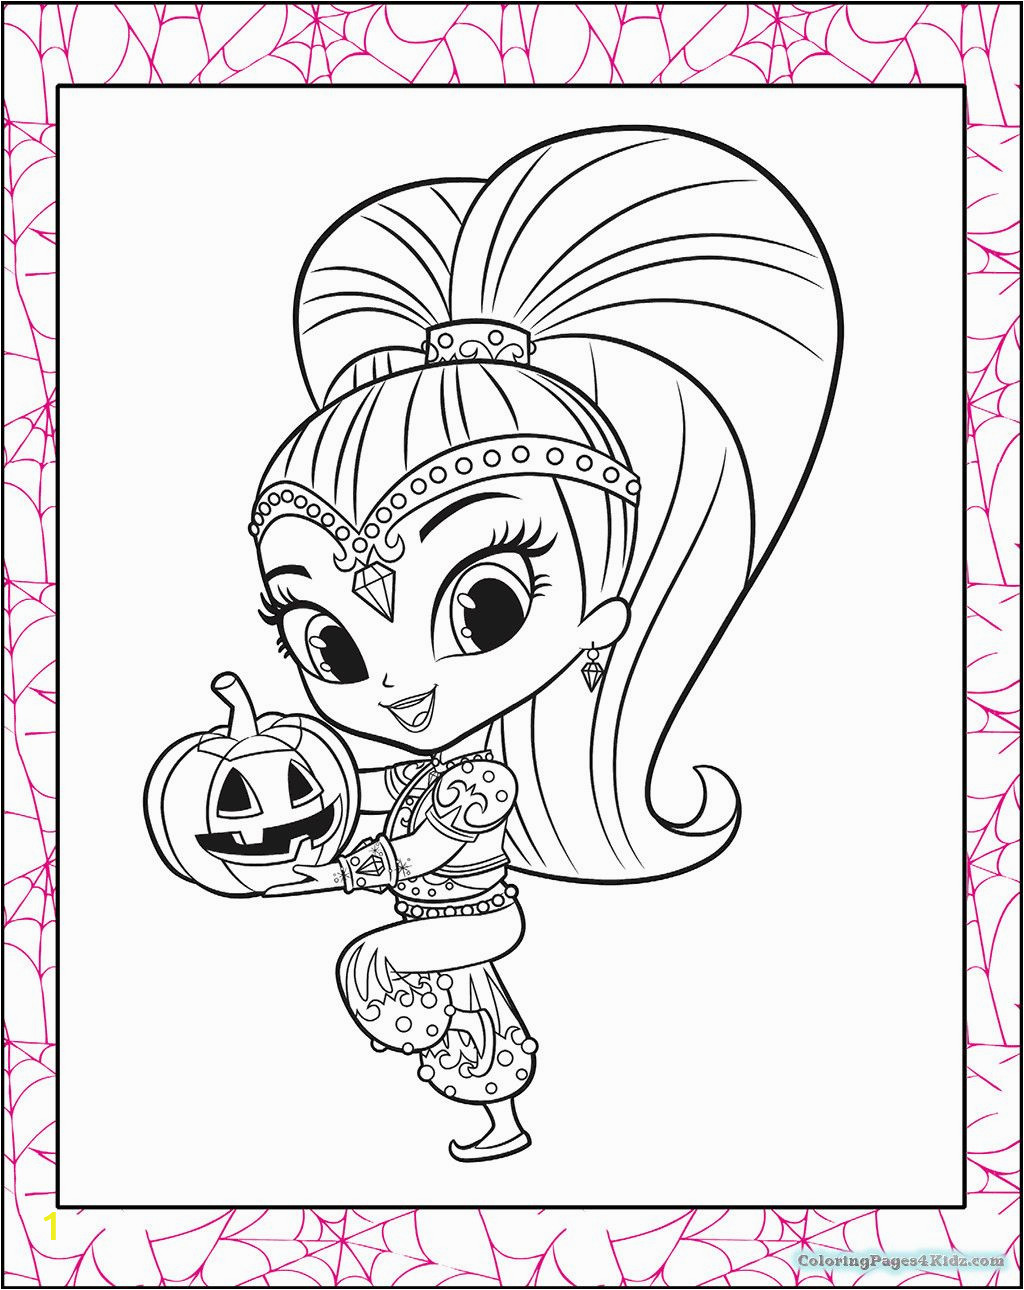 Nick Jr Shimmer and Shine Coloring Pages Shimmer and Shine Coloring Pages Beautiful Shimmer and